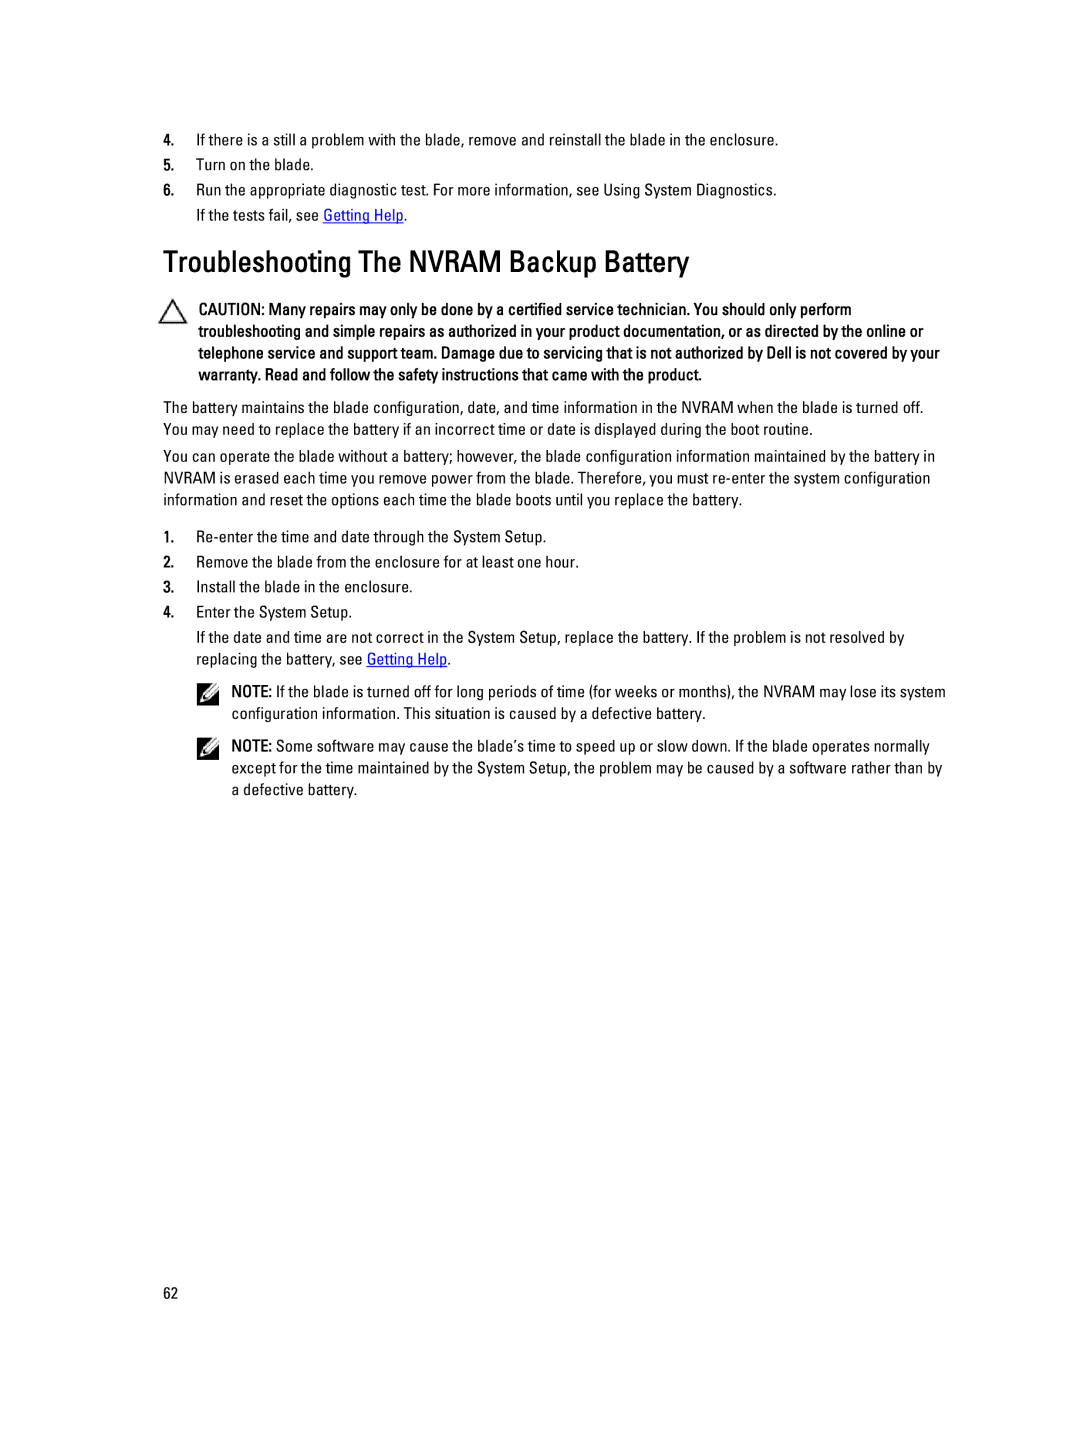 Dell M620 owner manual Troubleshooting The Nvram Backup Battery 